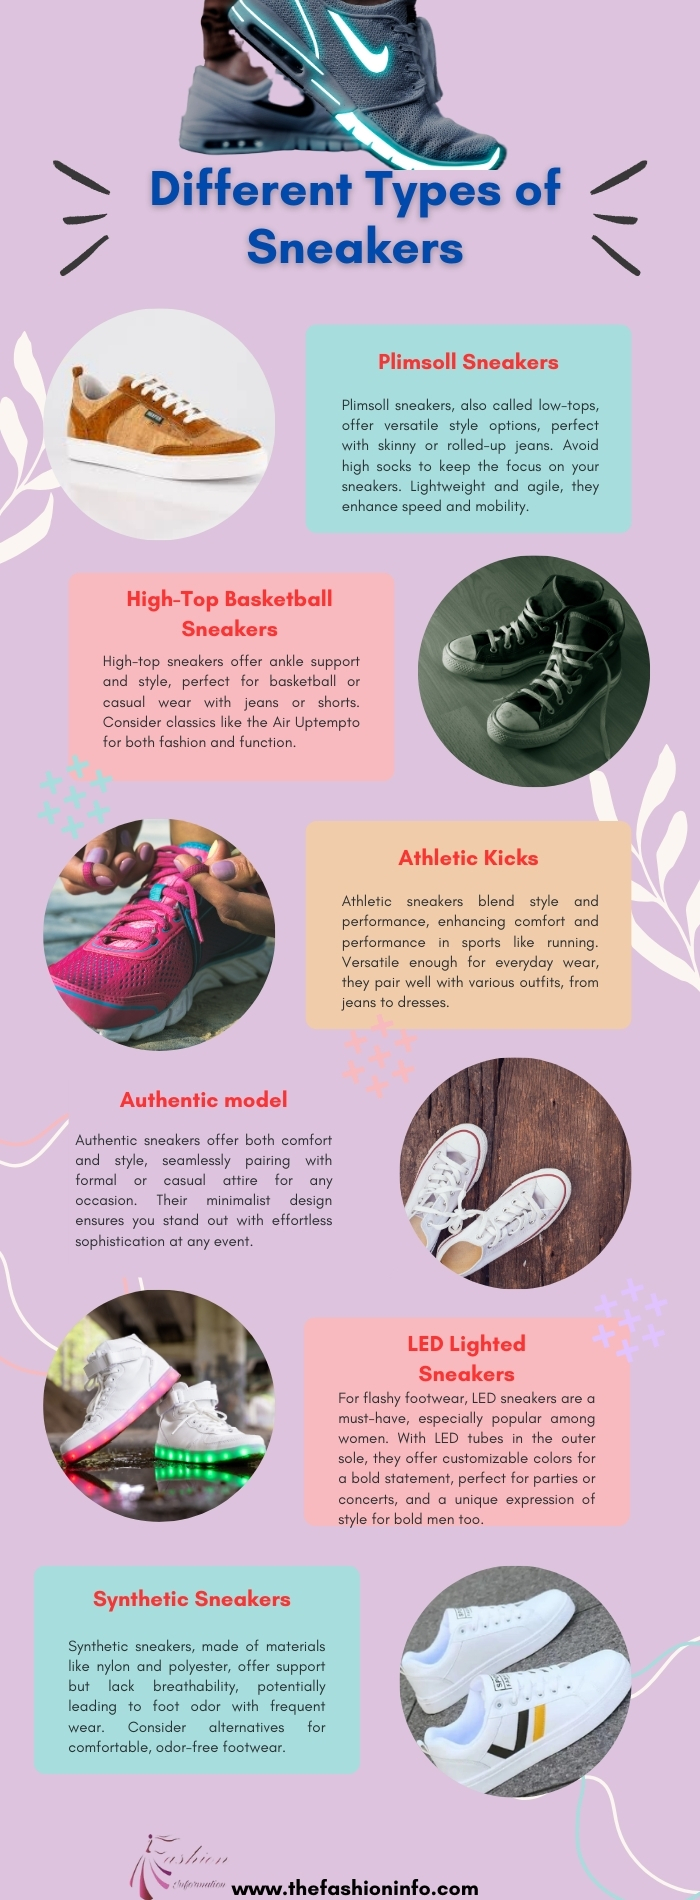 Different Types of Sneakers